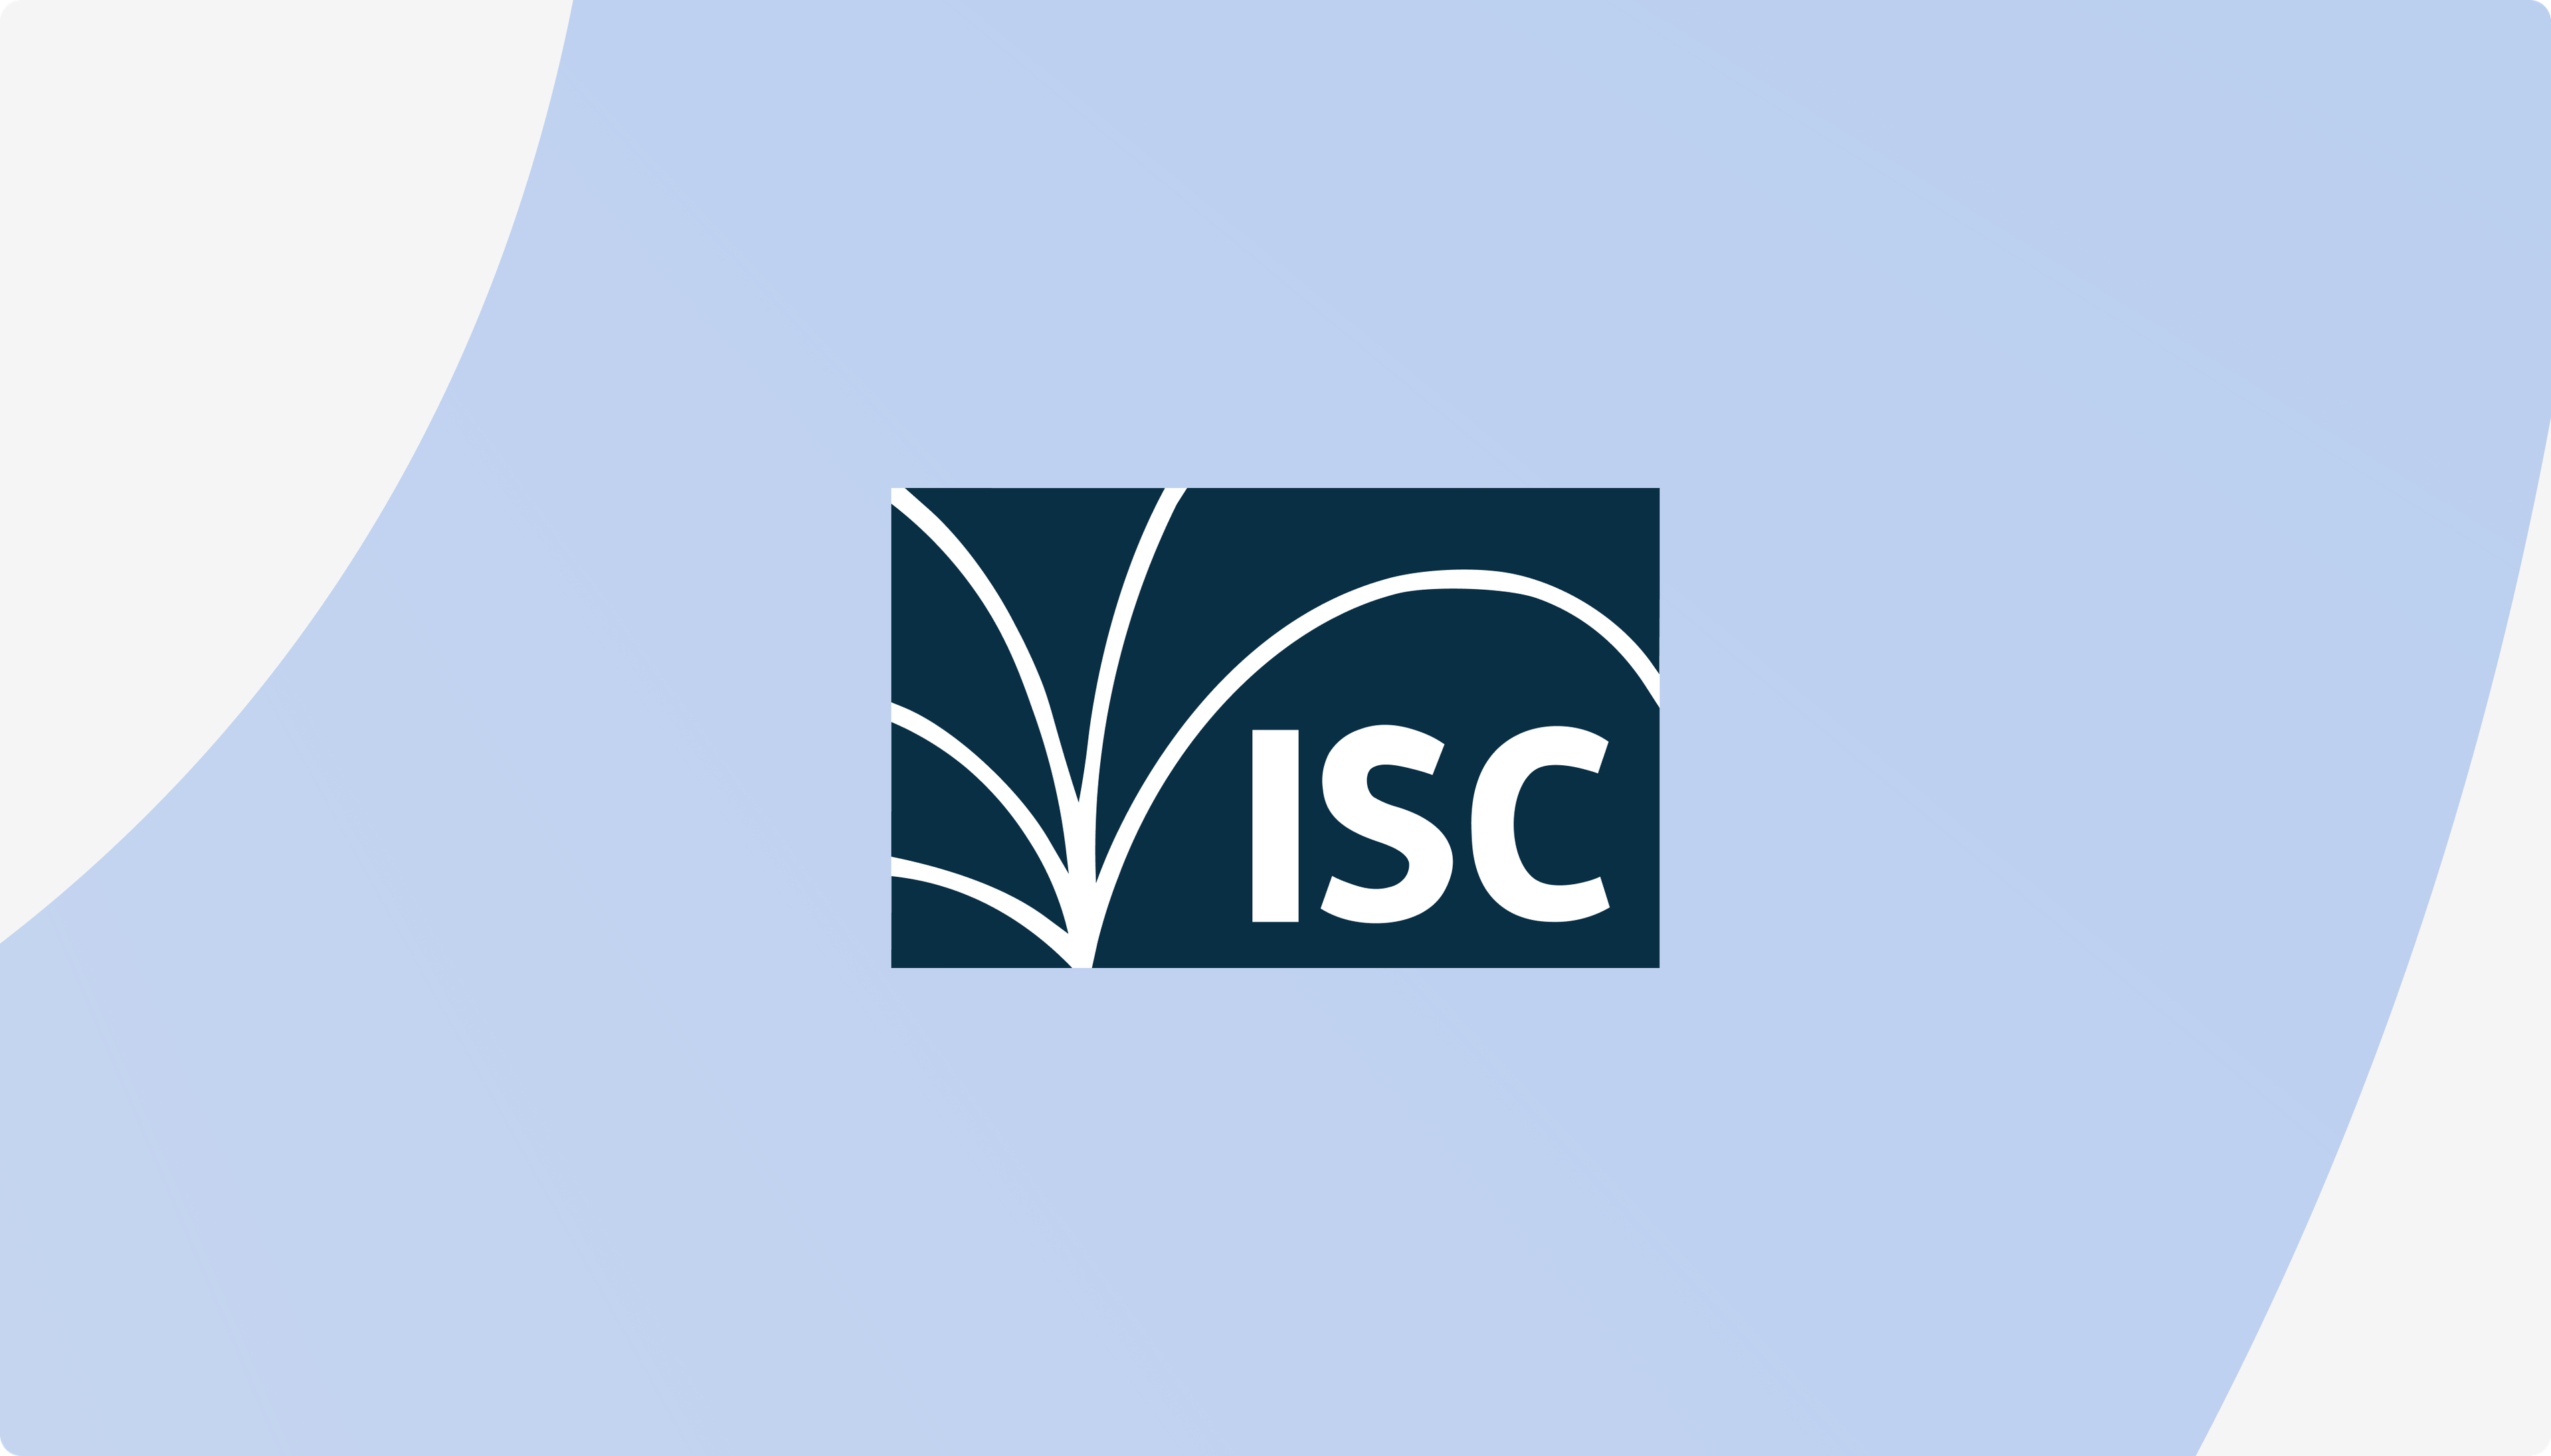 ISC - The Internet Systems Consortium logo